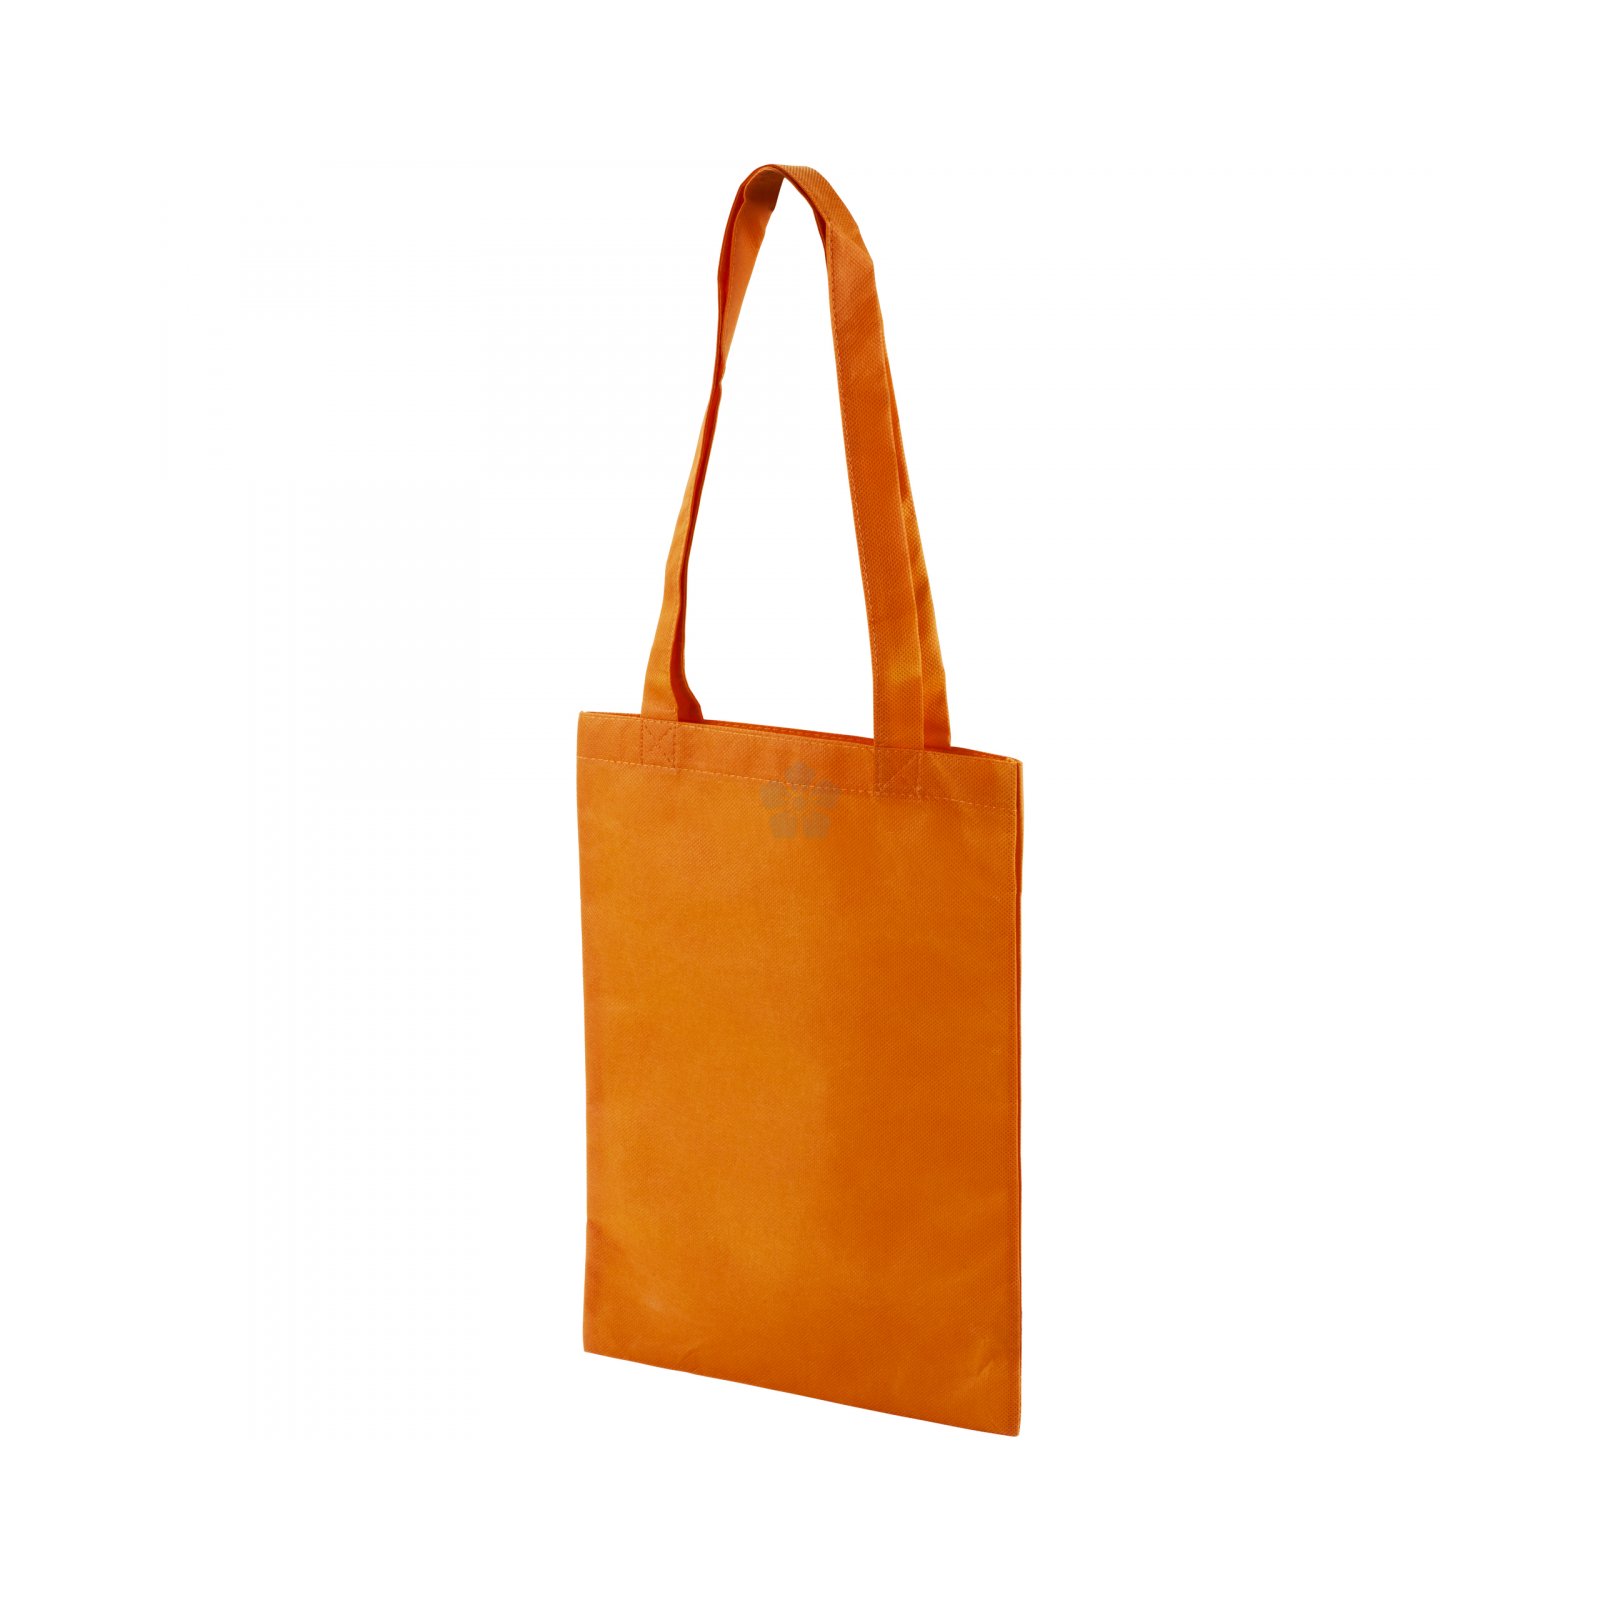 Promotional Small Tote Bag, Personalised by MoJo Promotions